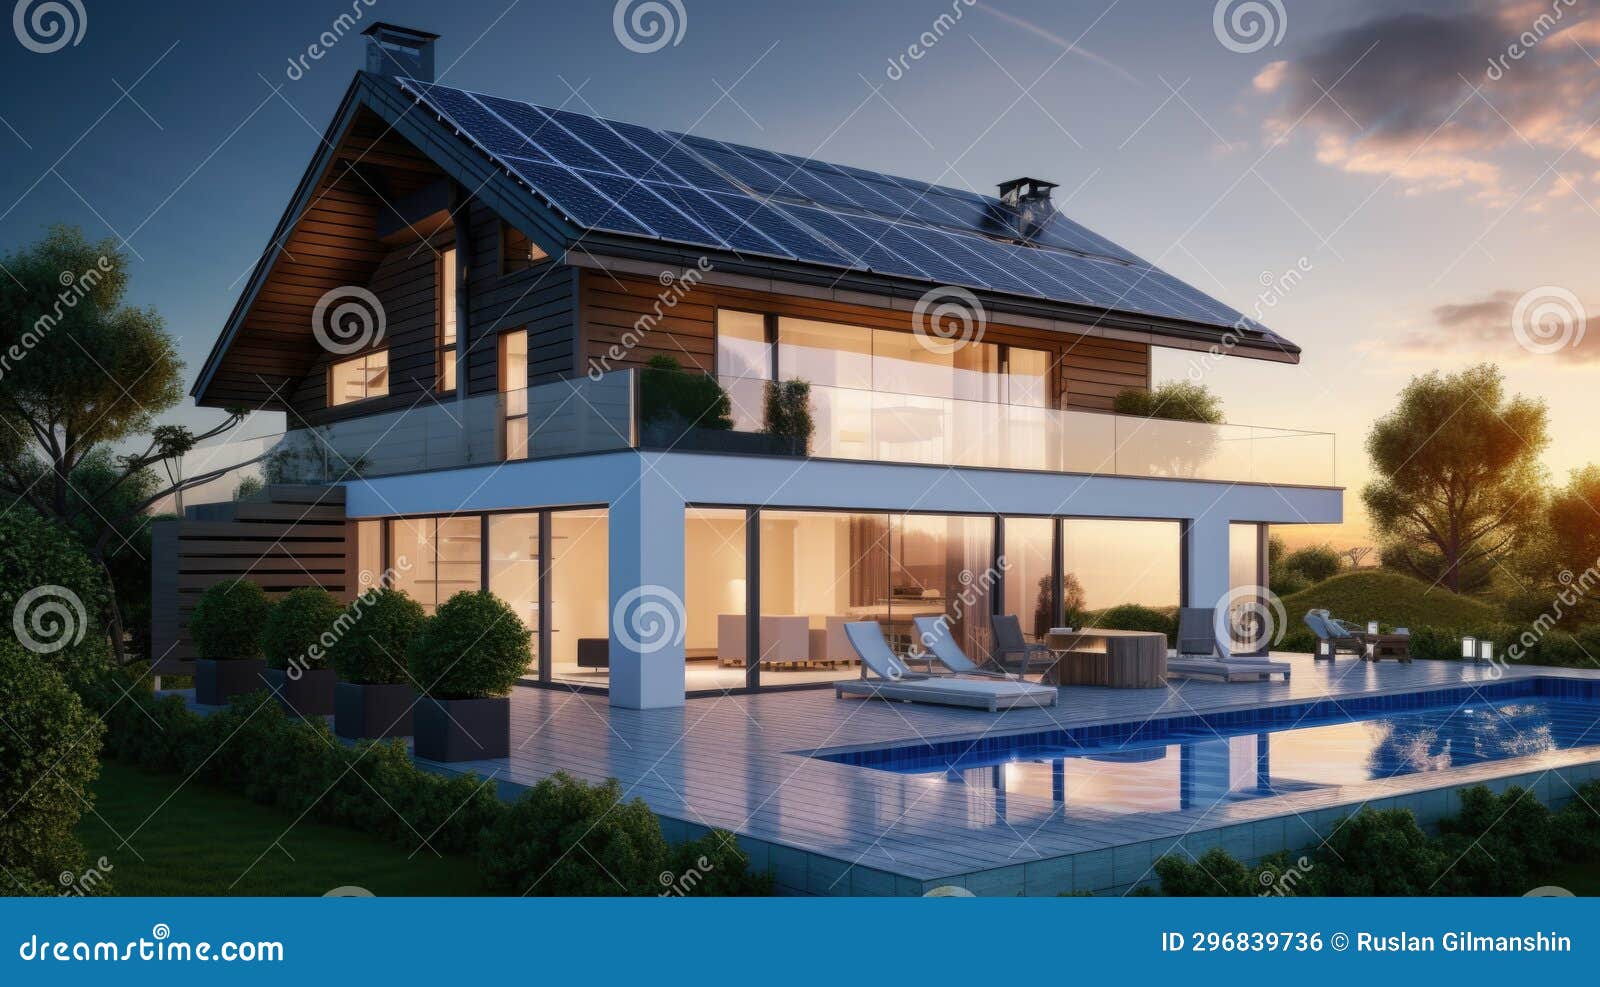 modern energy-efficient house with solar panels on the roof